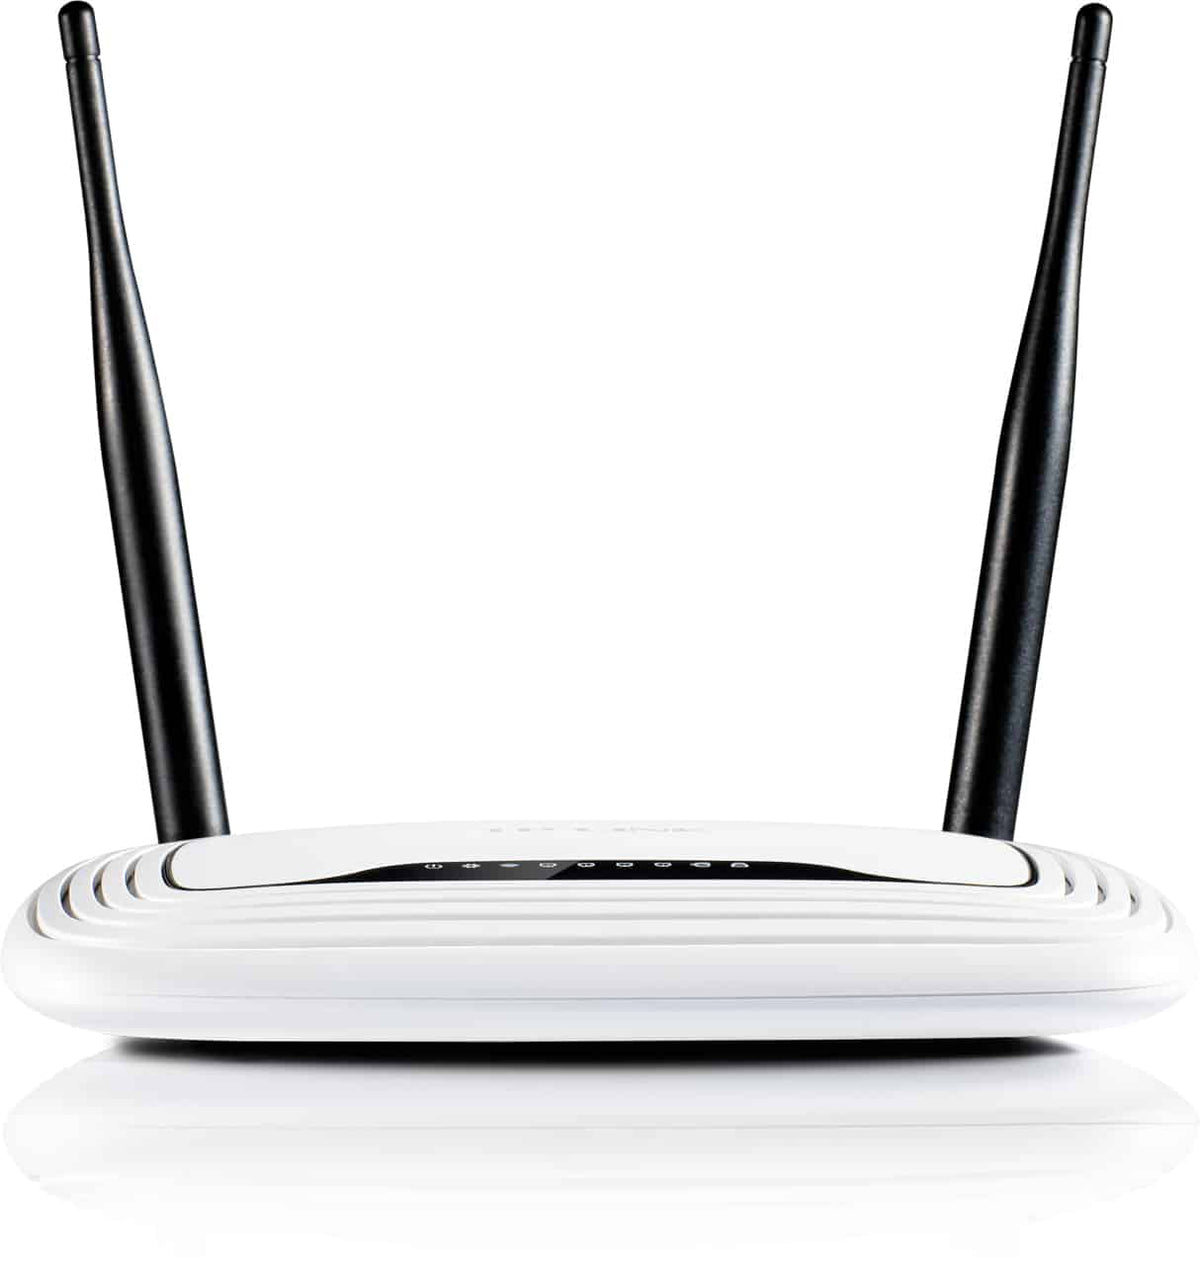 Wireless Router TP-Link TL-WR841N 300Mbps